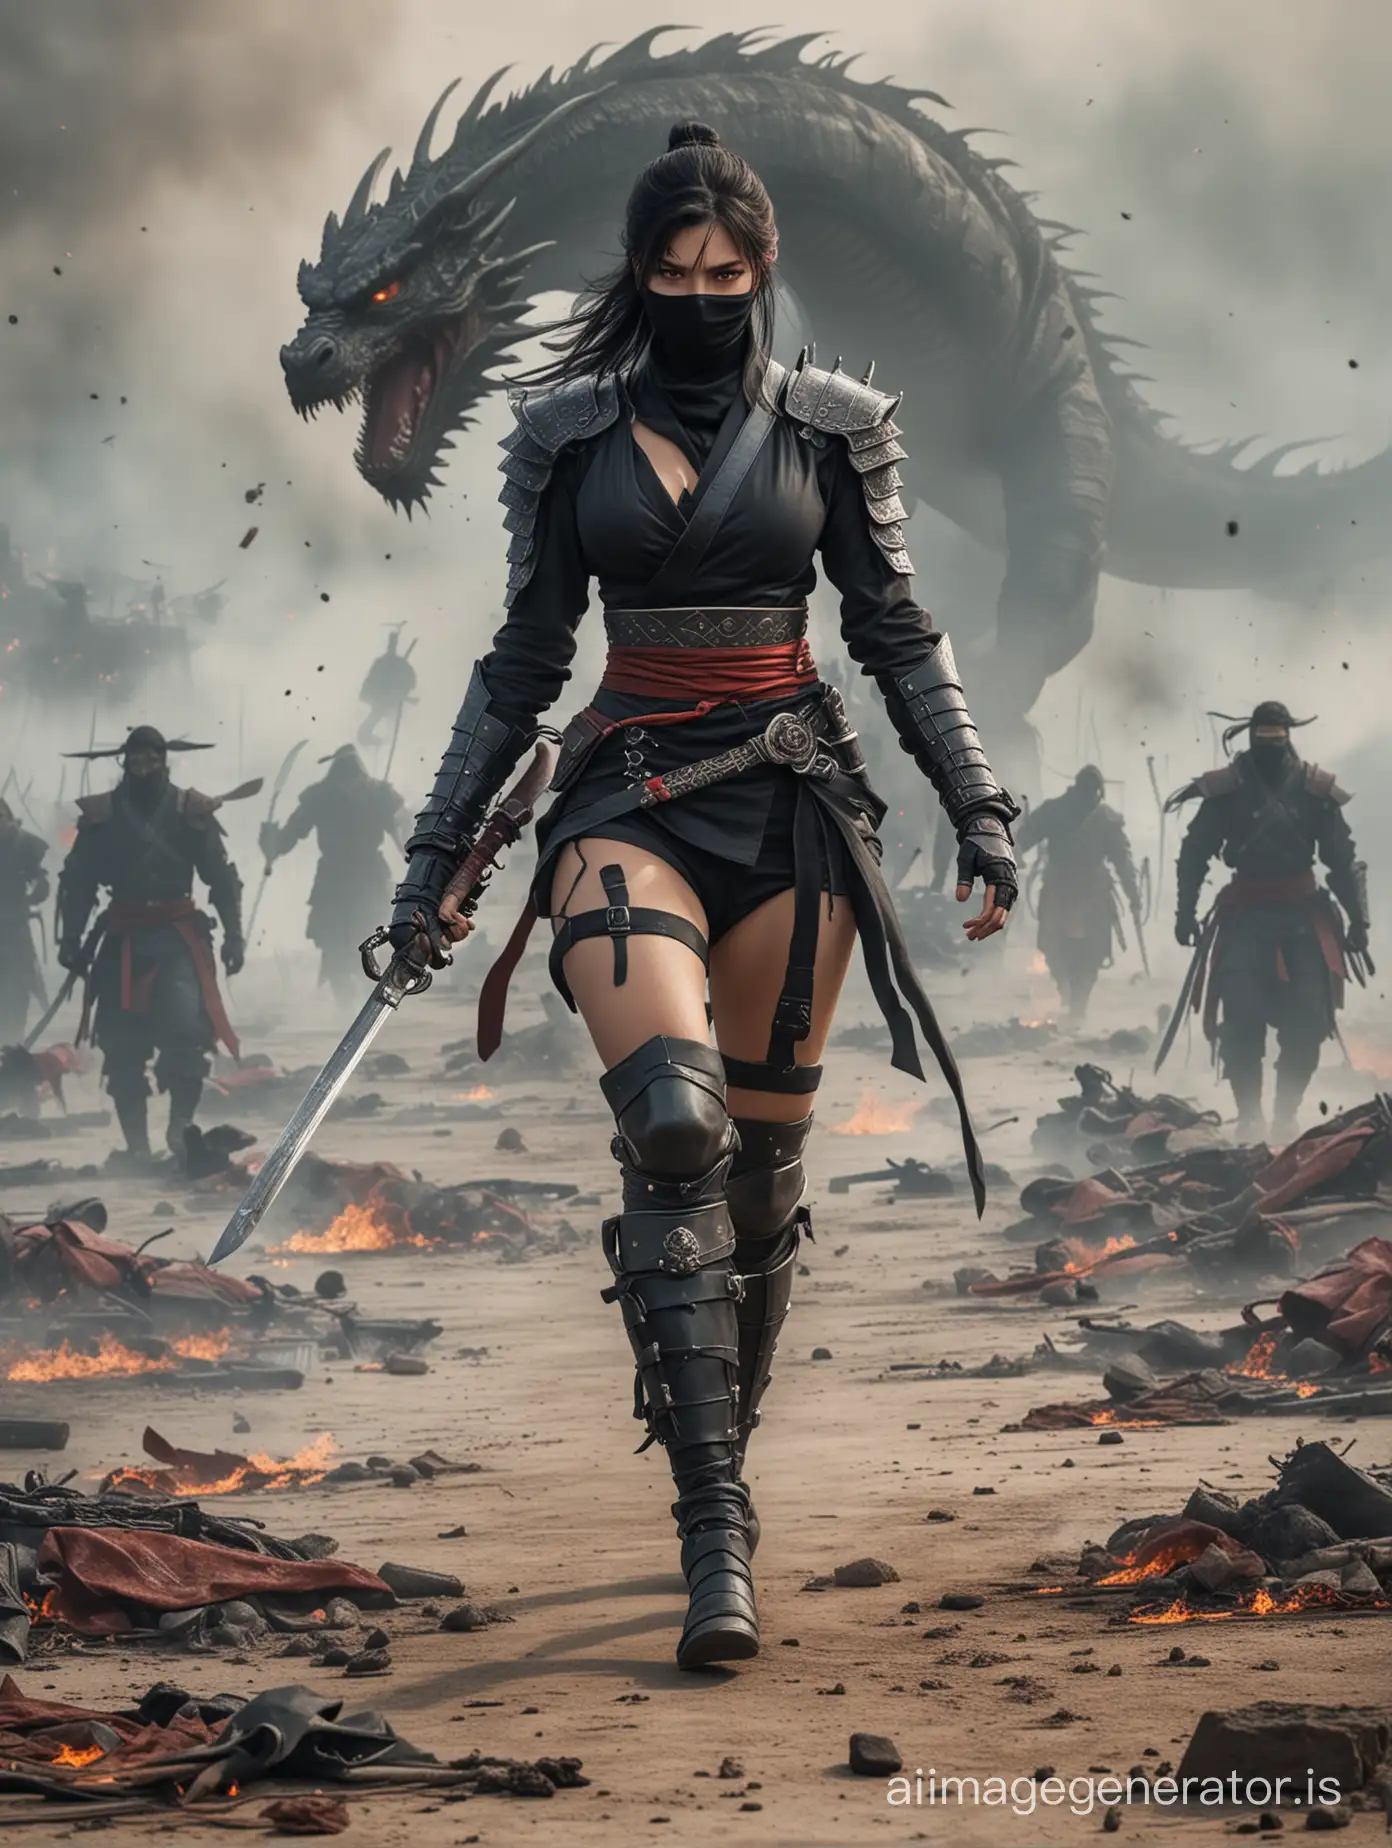 scantily dressed female ninja walking over a battlefield. The battle has been won, smoke everywhere. Dead bodies on the floor. no other people in picture. Eyes of the big dragon watching her.